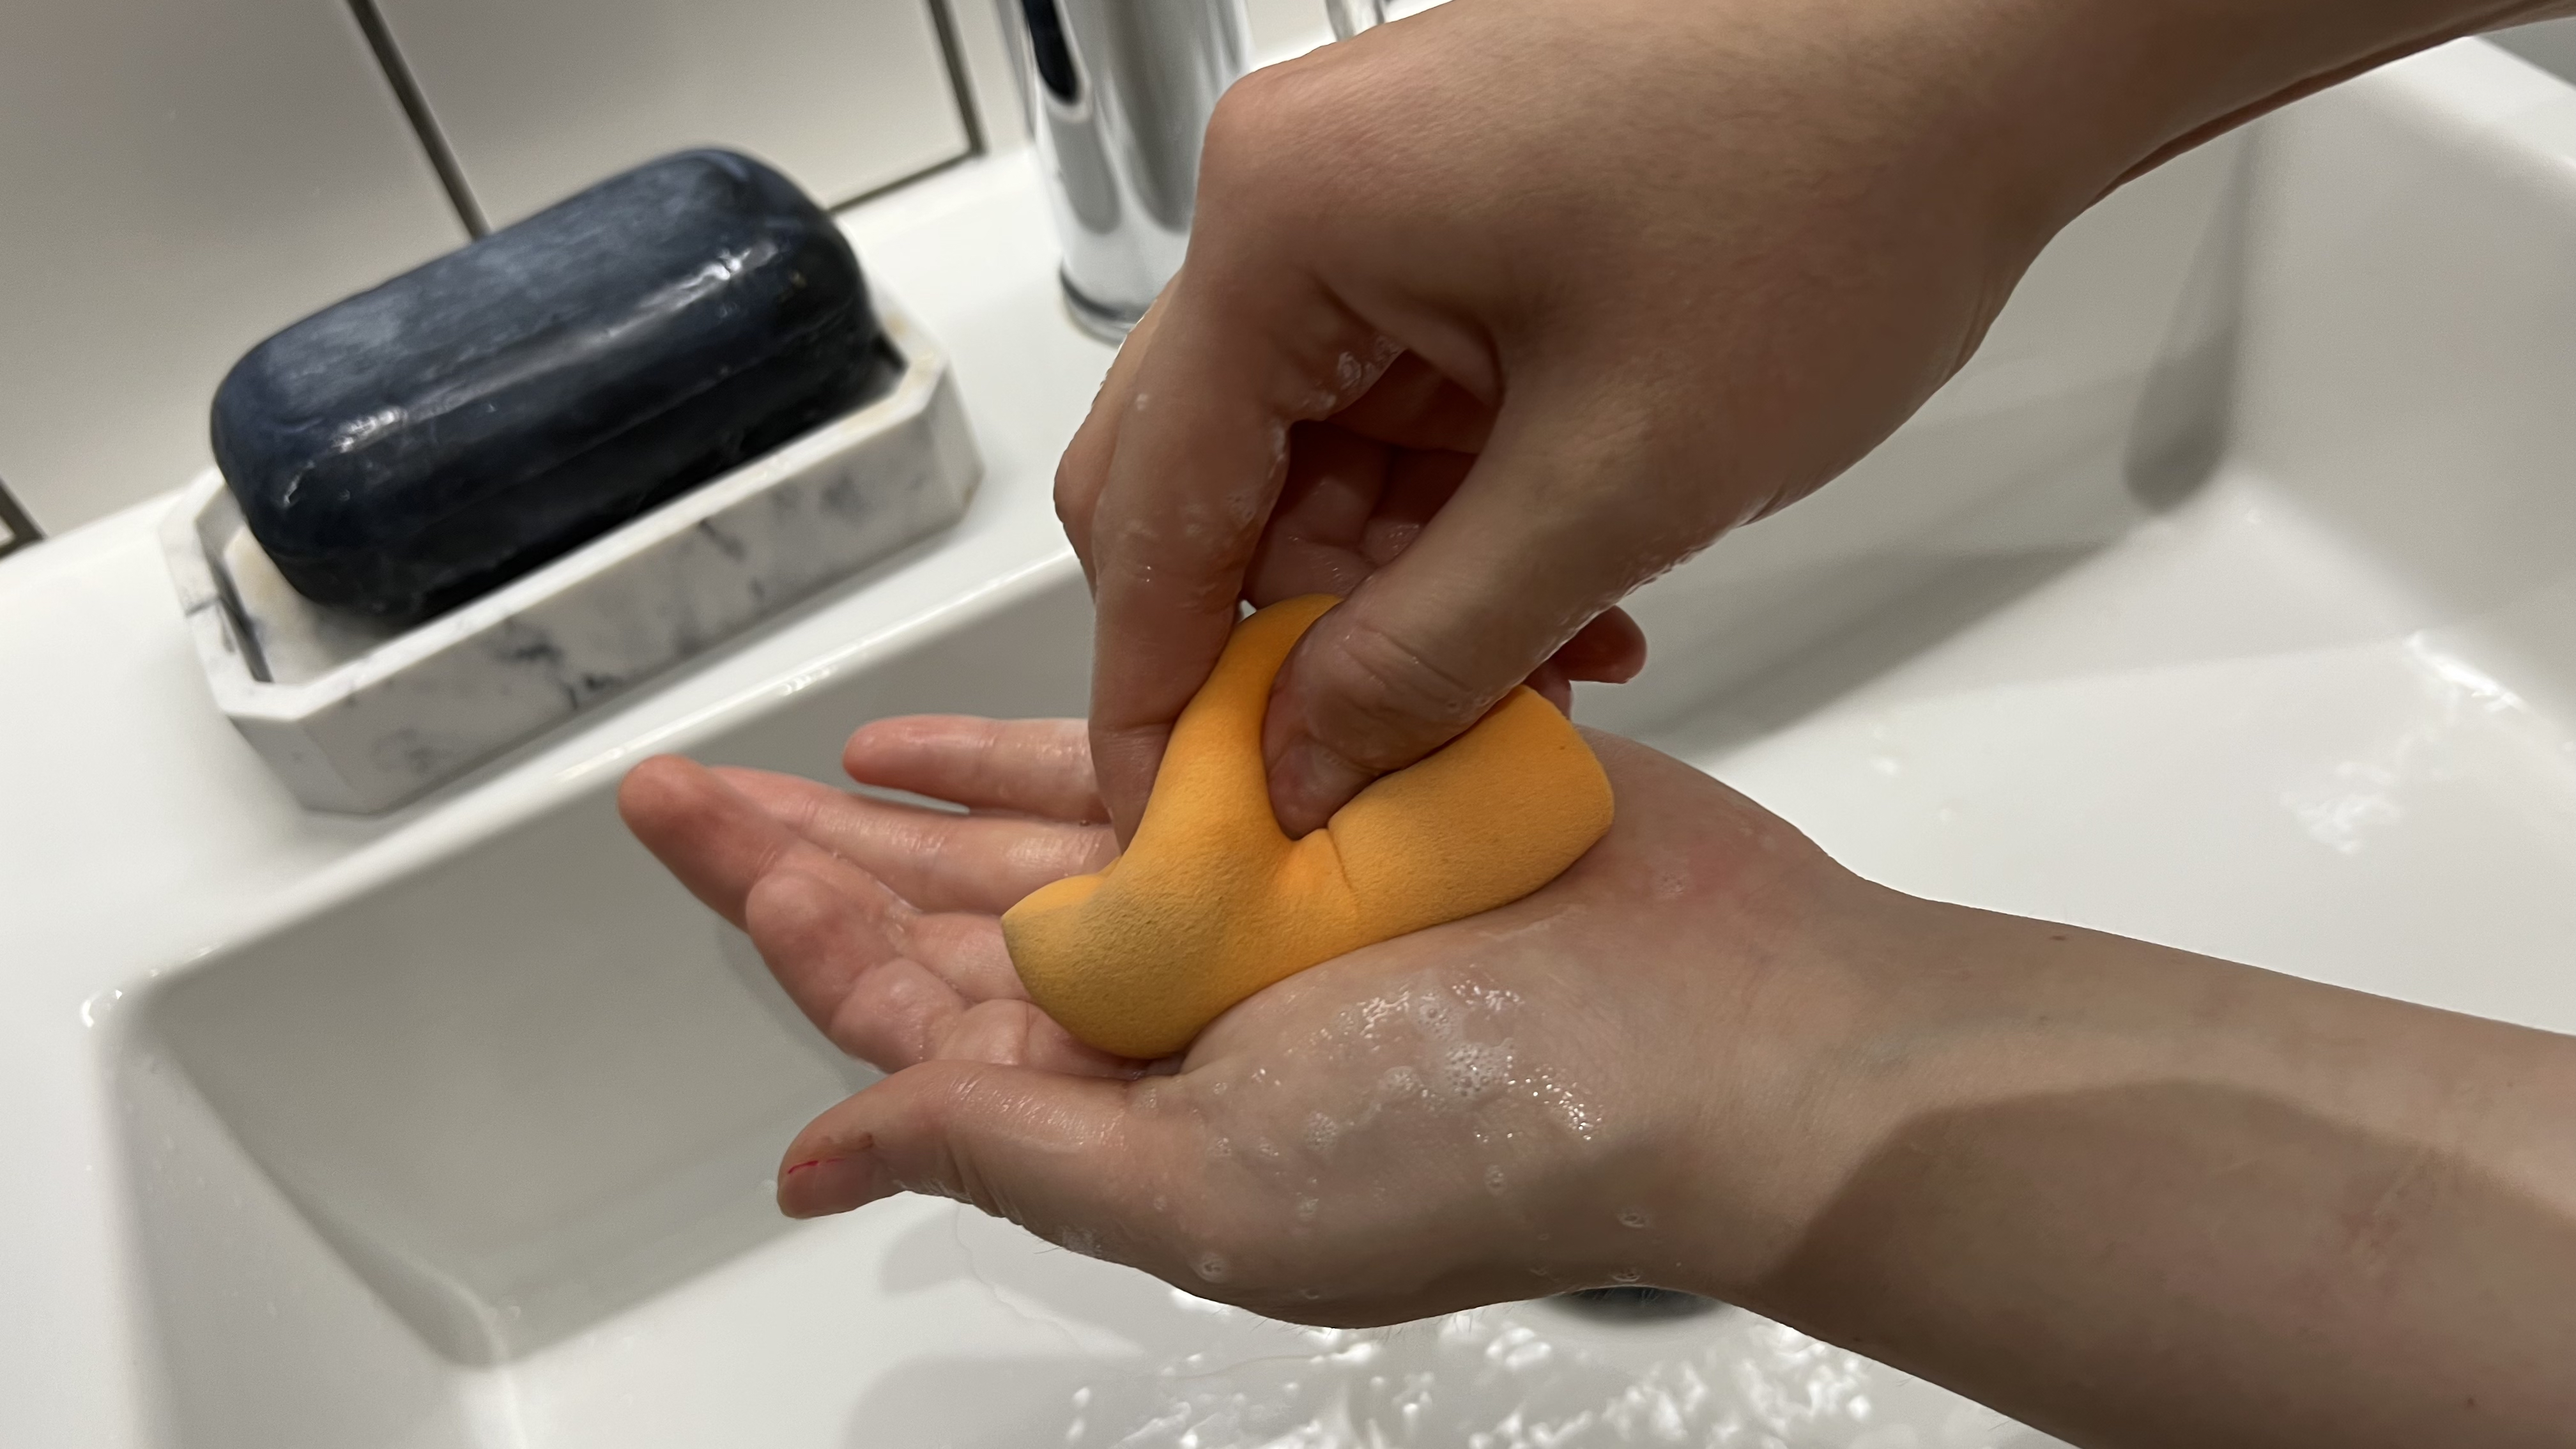 An image showing a person cleaning a Beautyblender